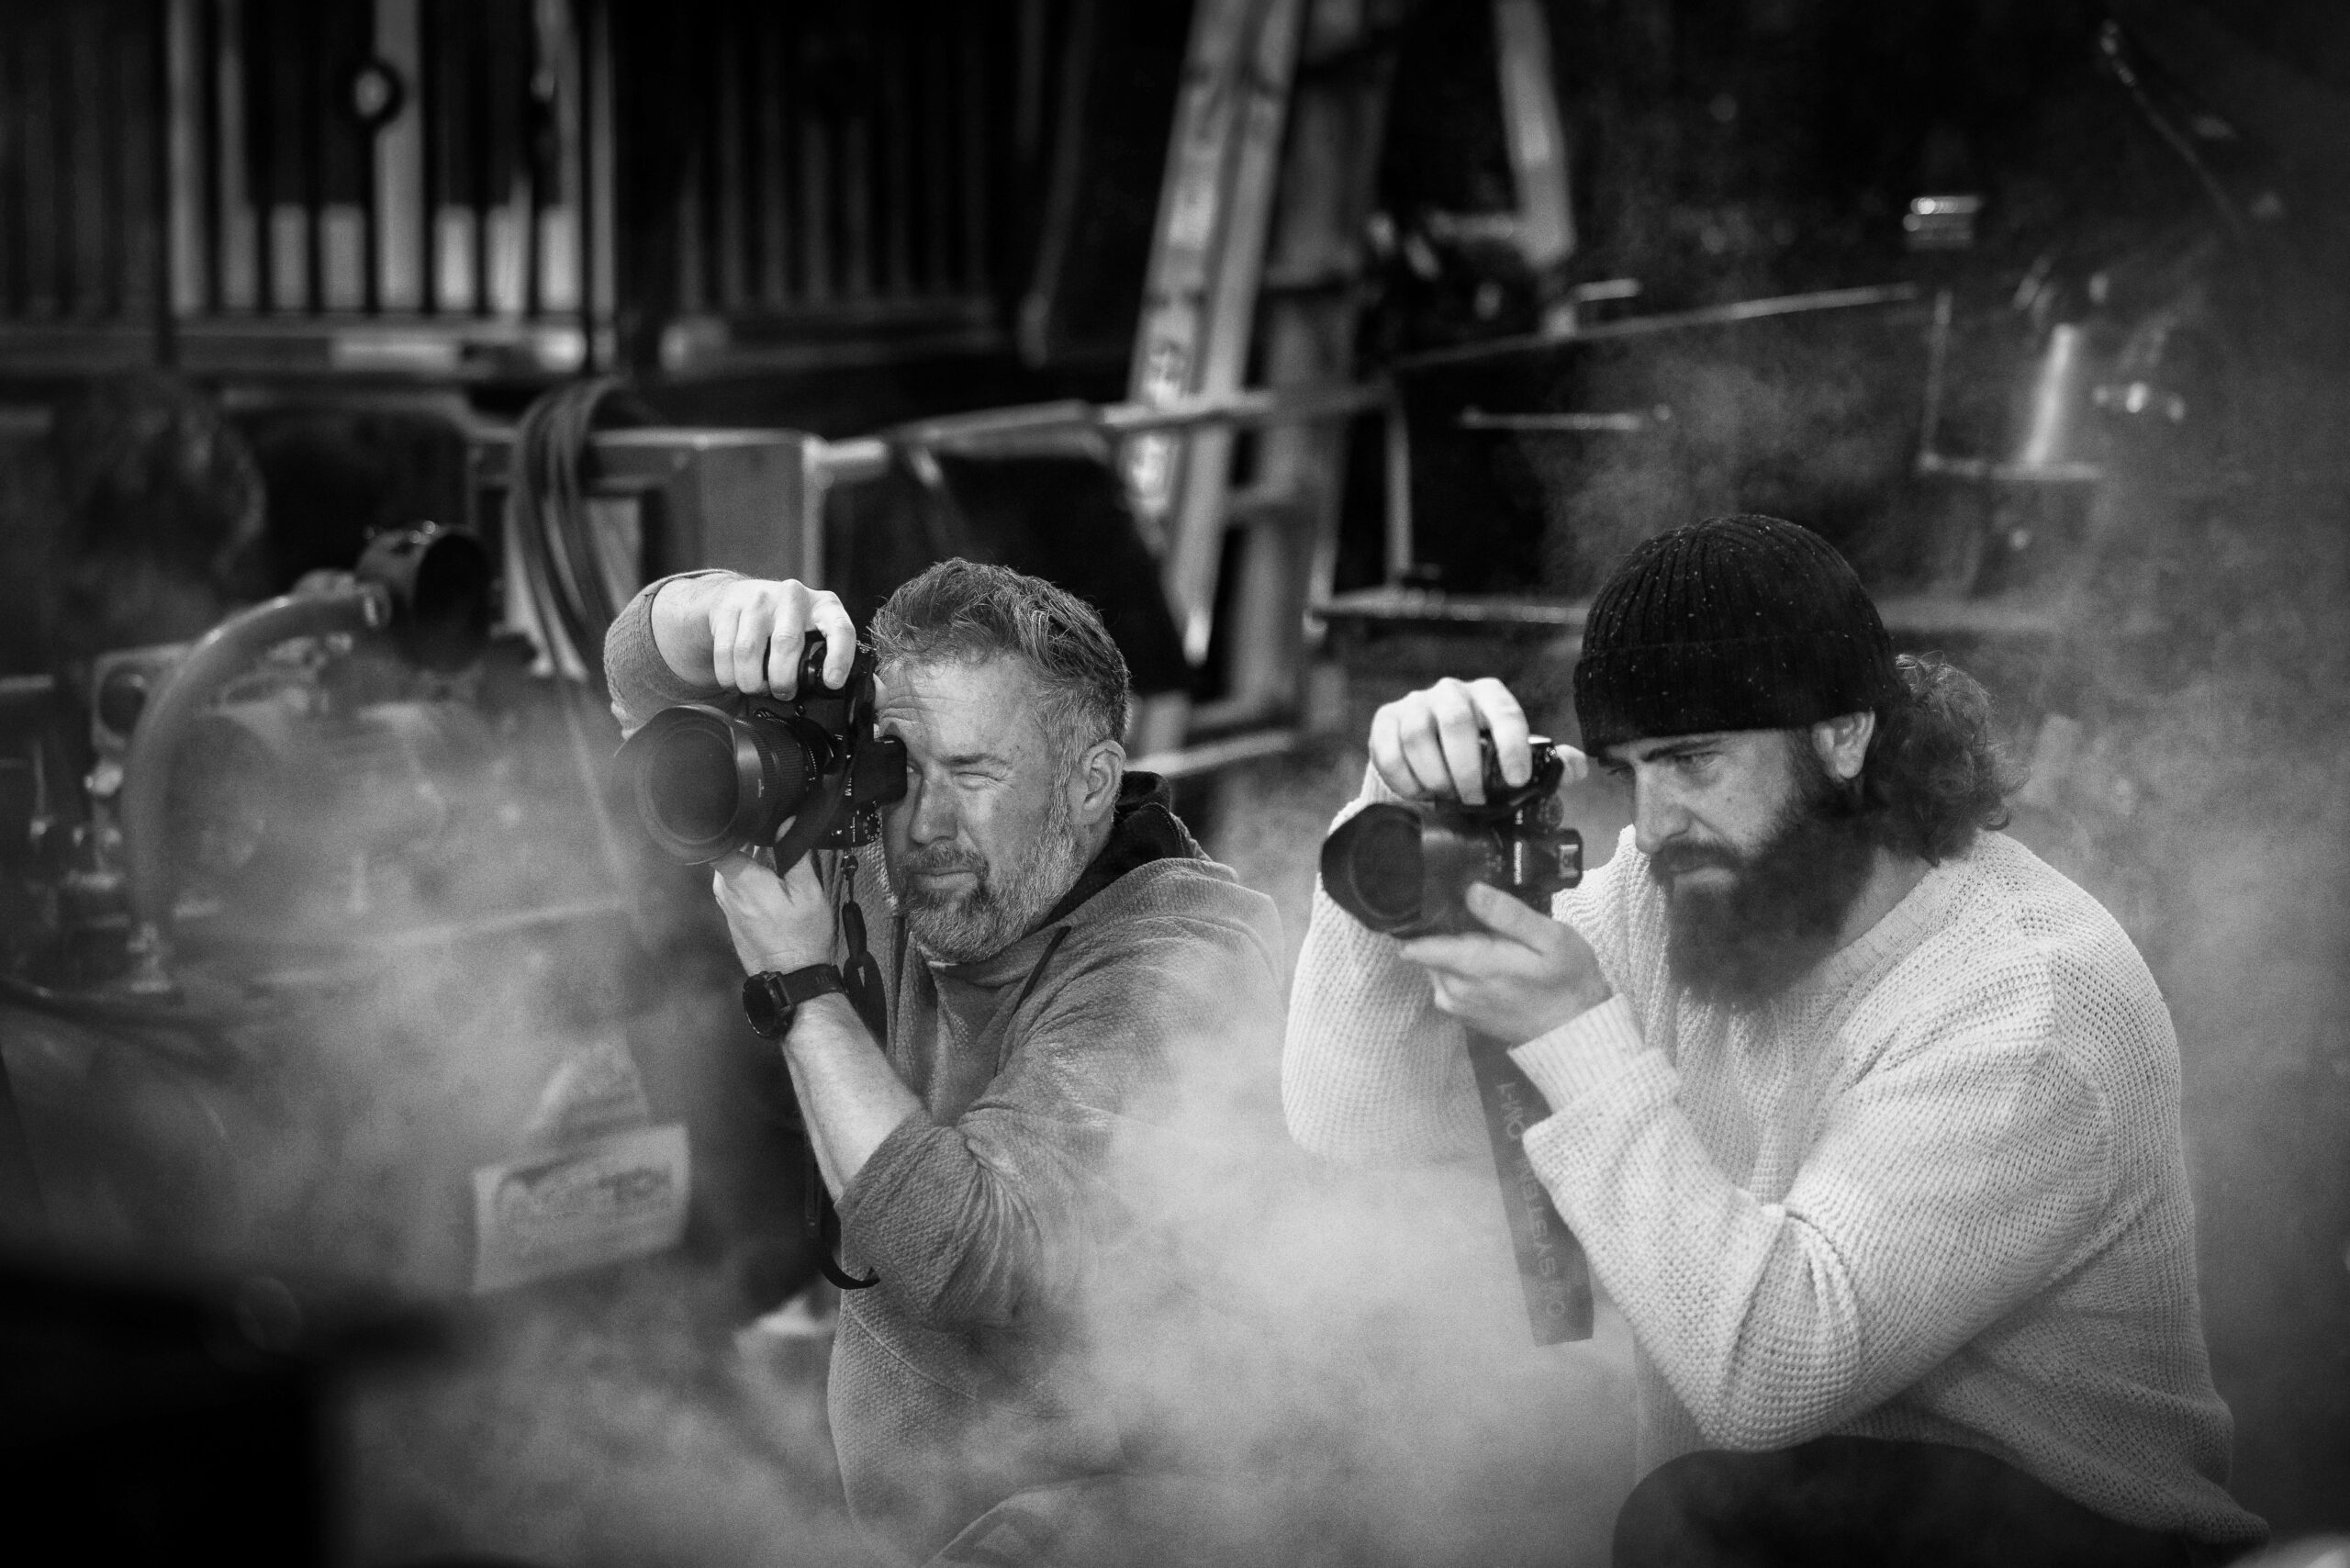 Two men peer into their camera lenses, both surrounded by steam inside the Carswell Park maintenance facility.